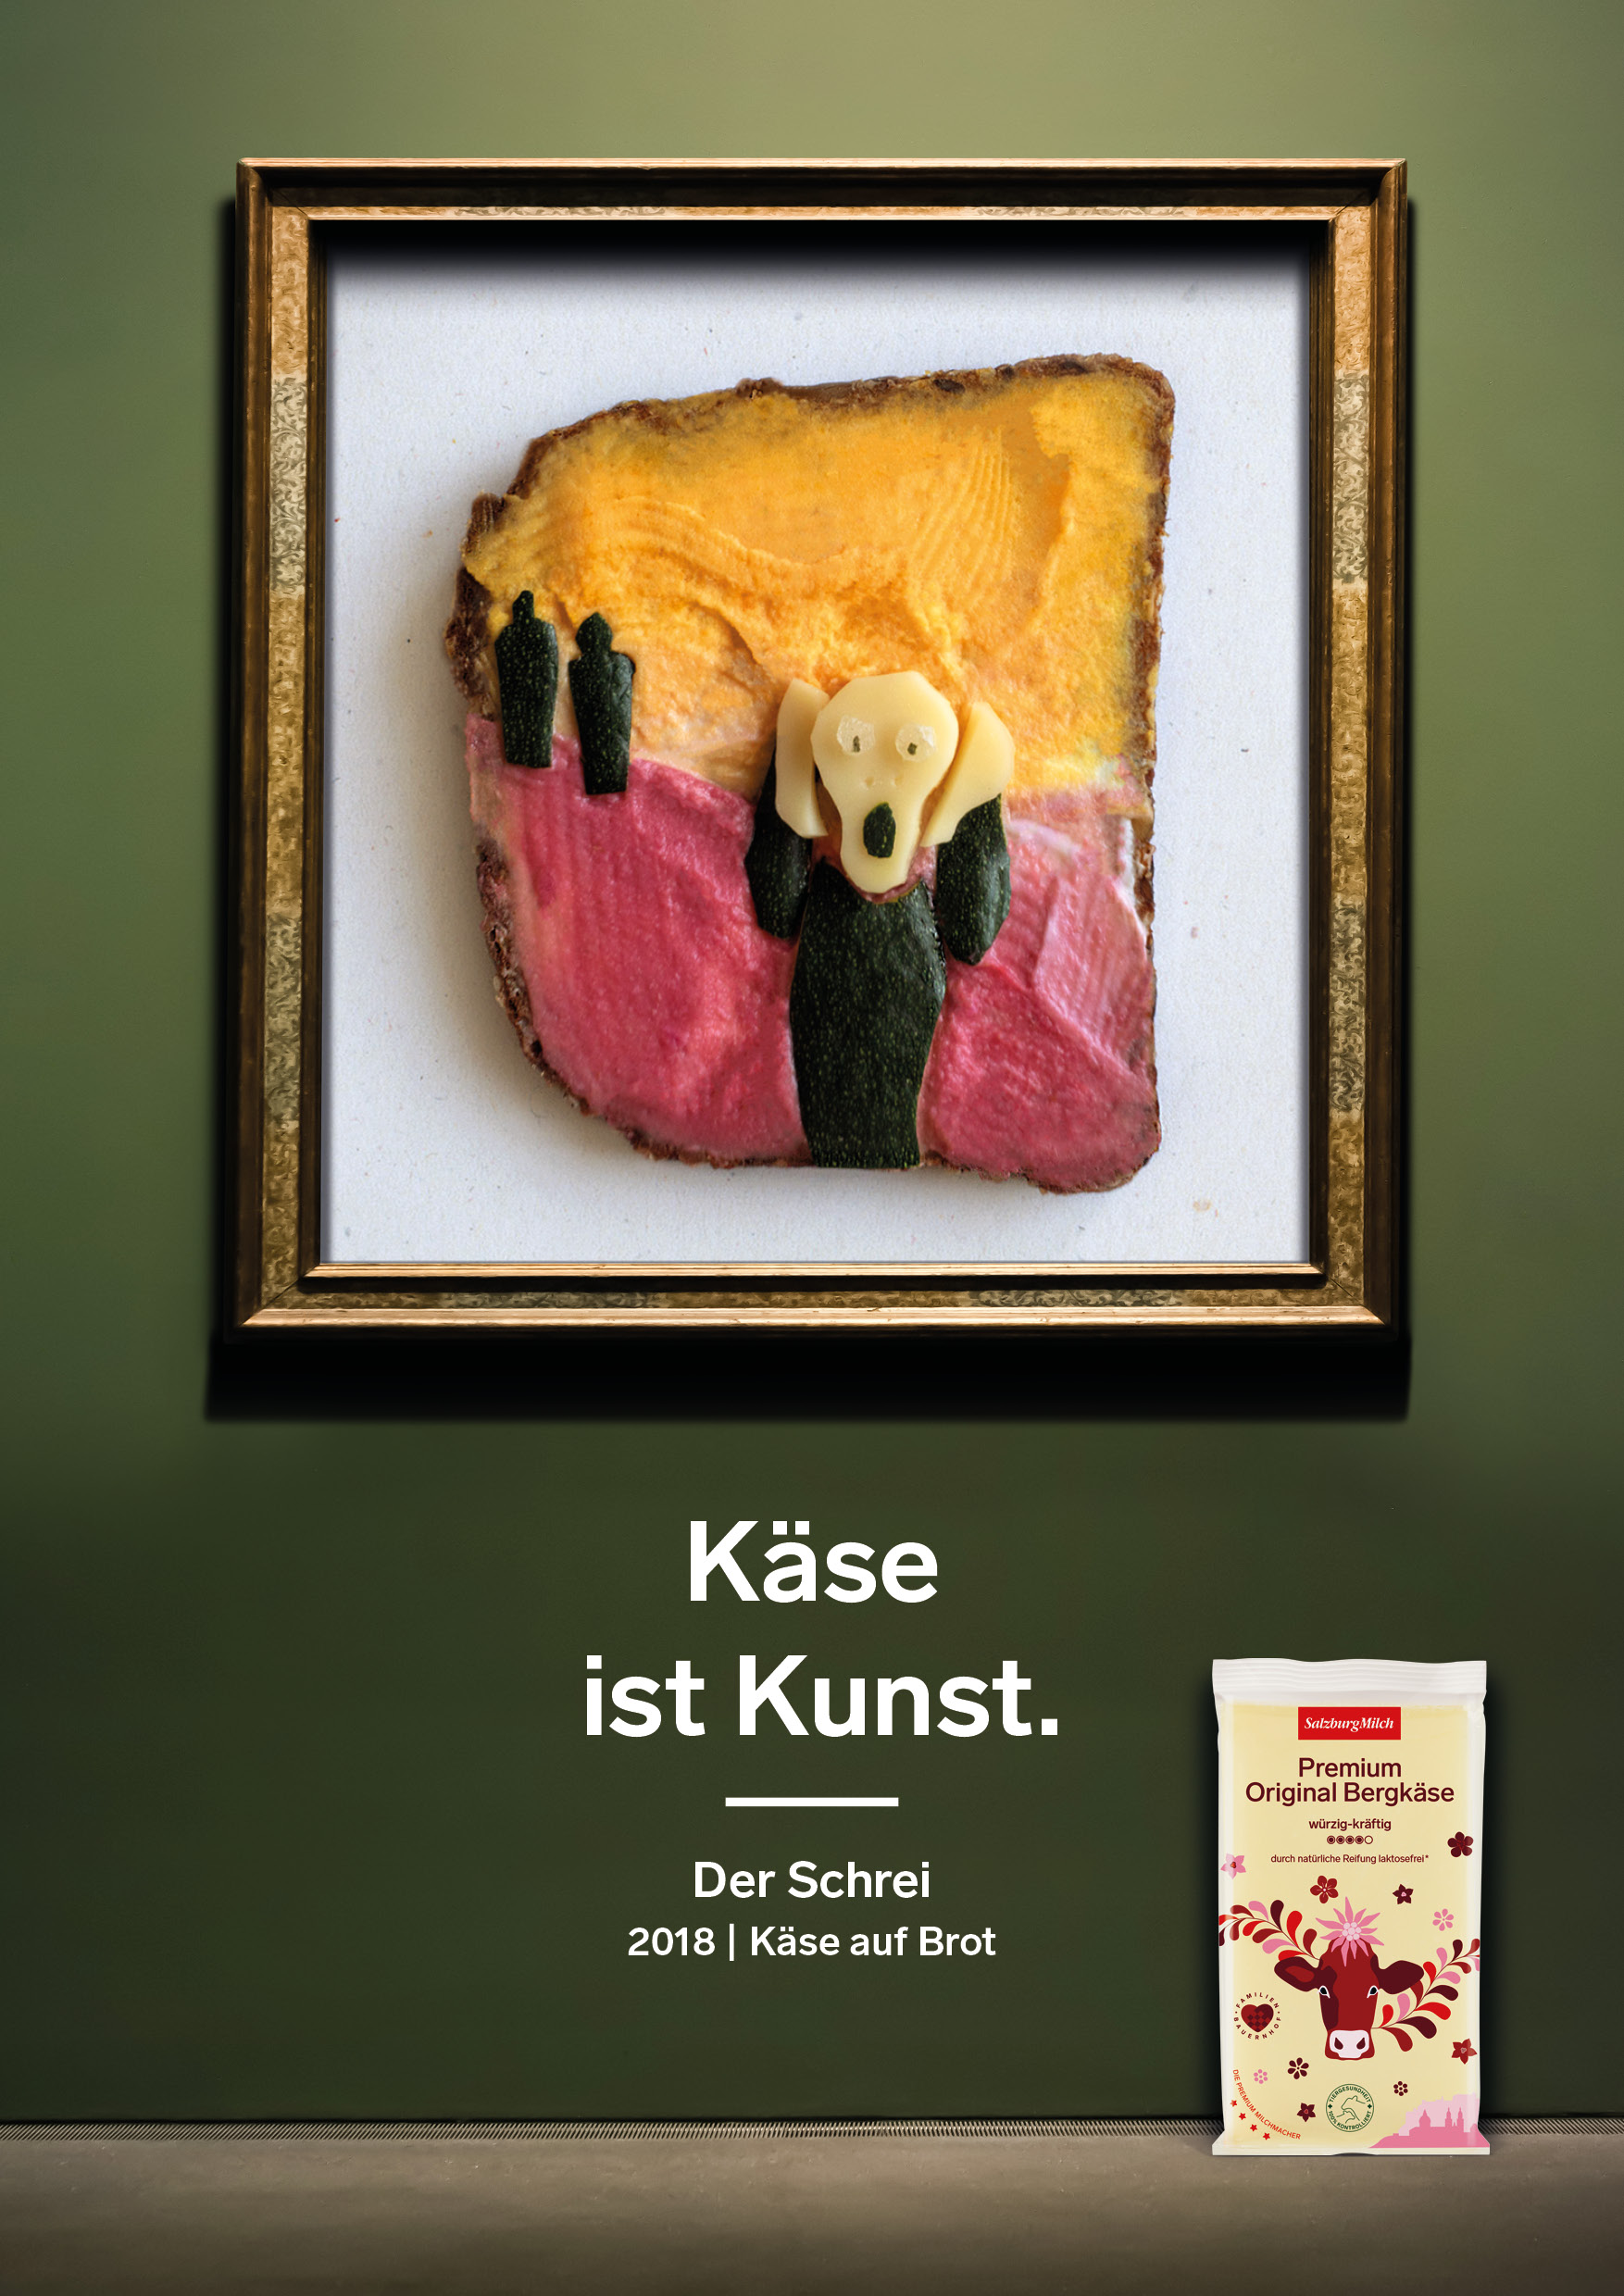 An Austrian cheese brand celebrates the masterpieces of art